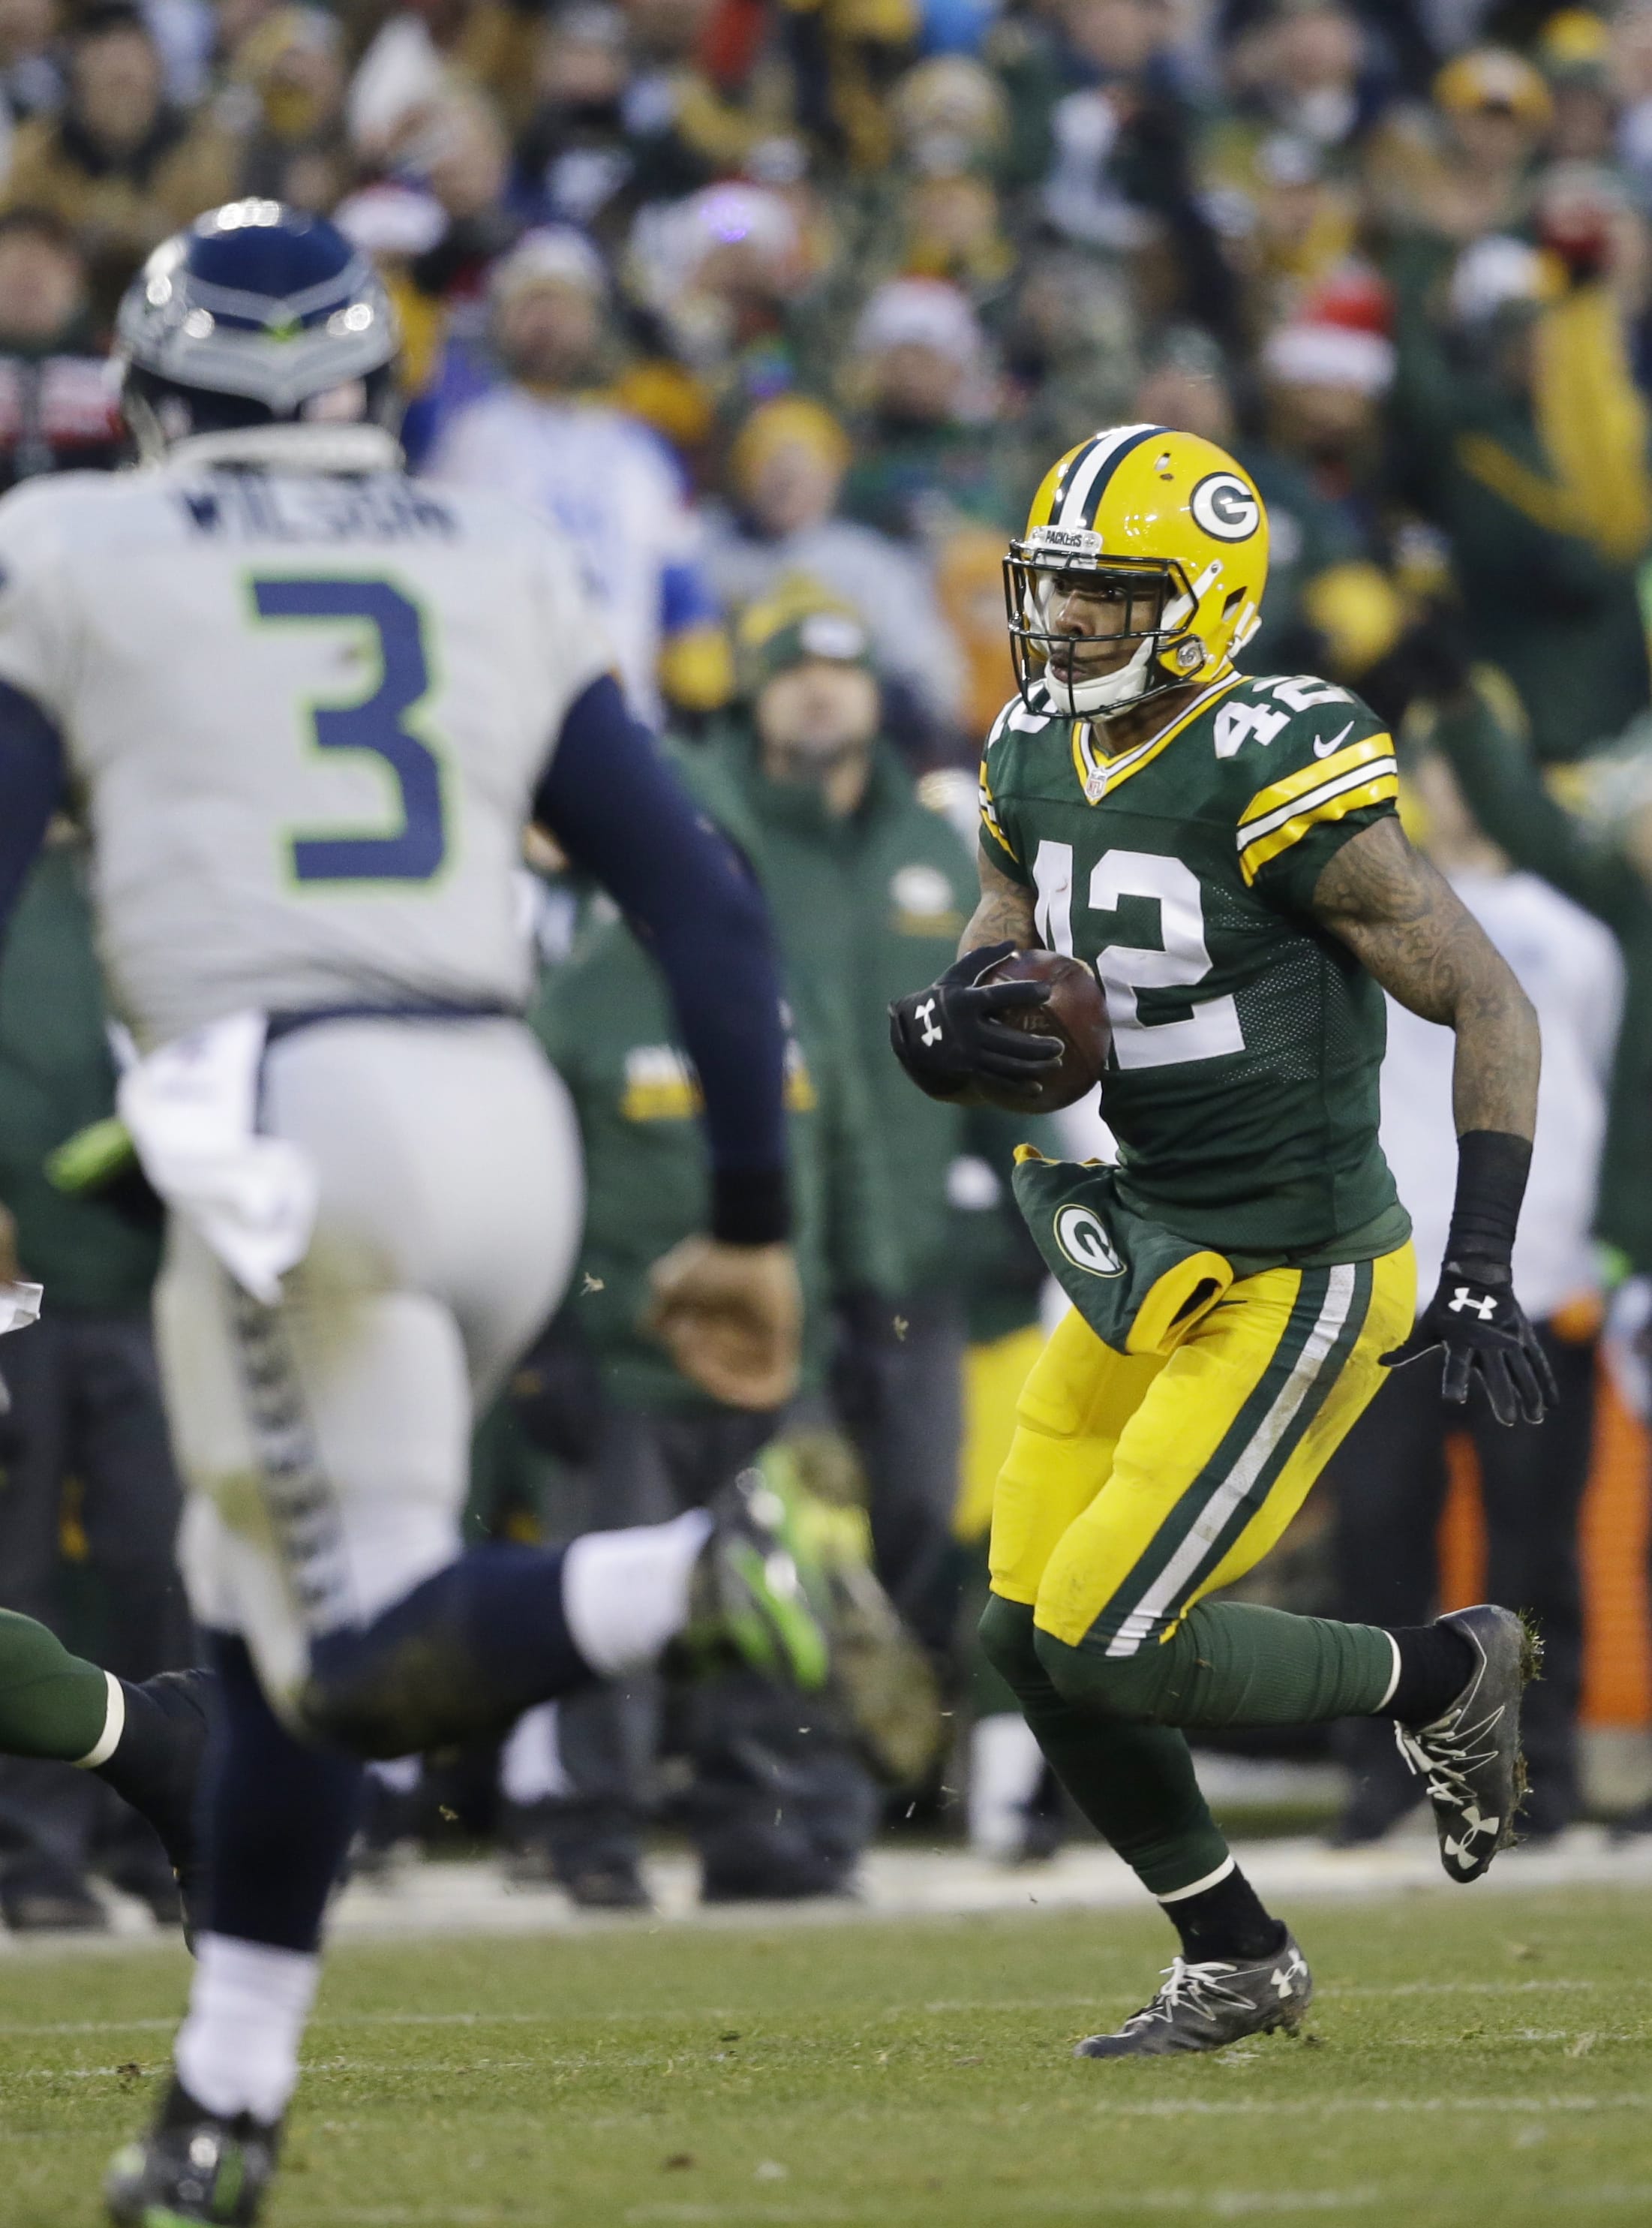 Green Bay Packers' Morgan Burnett runs back his interception during the first half of an NFL football game against the Seattle Seahawks Sunday, Dec. 11, 2016, in Green Bay, Wis.